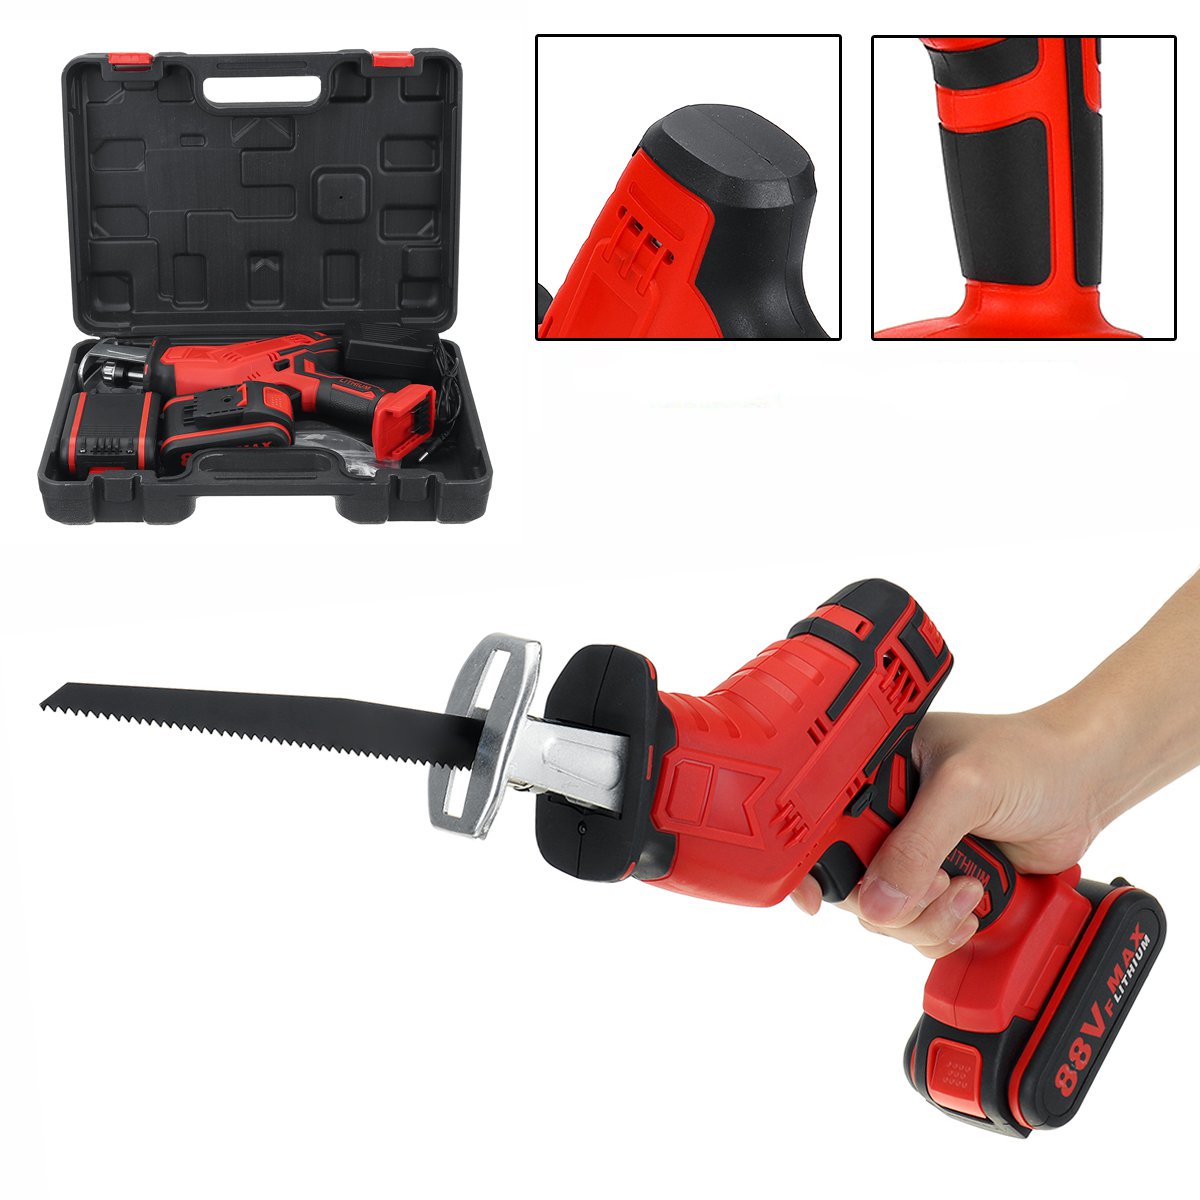 88VF-Cordless-Electric-Reciprocating-Saw-Outdoor-Portable-Woodworking-Tool-One-Hand-Saw-W-12-Battery-1883228-4